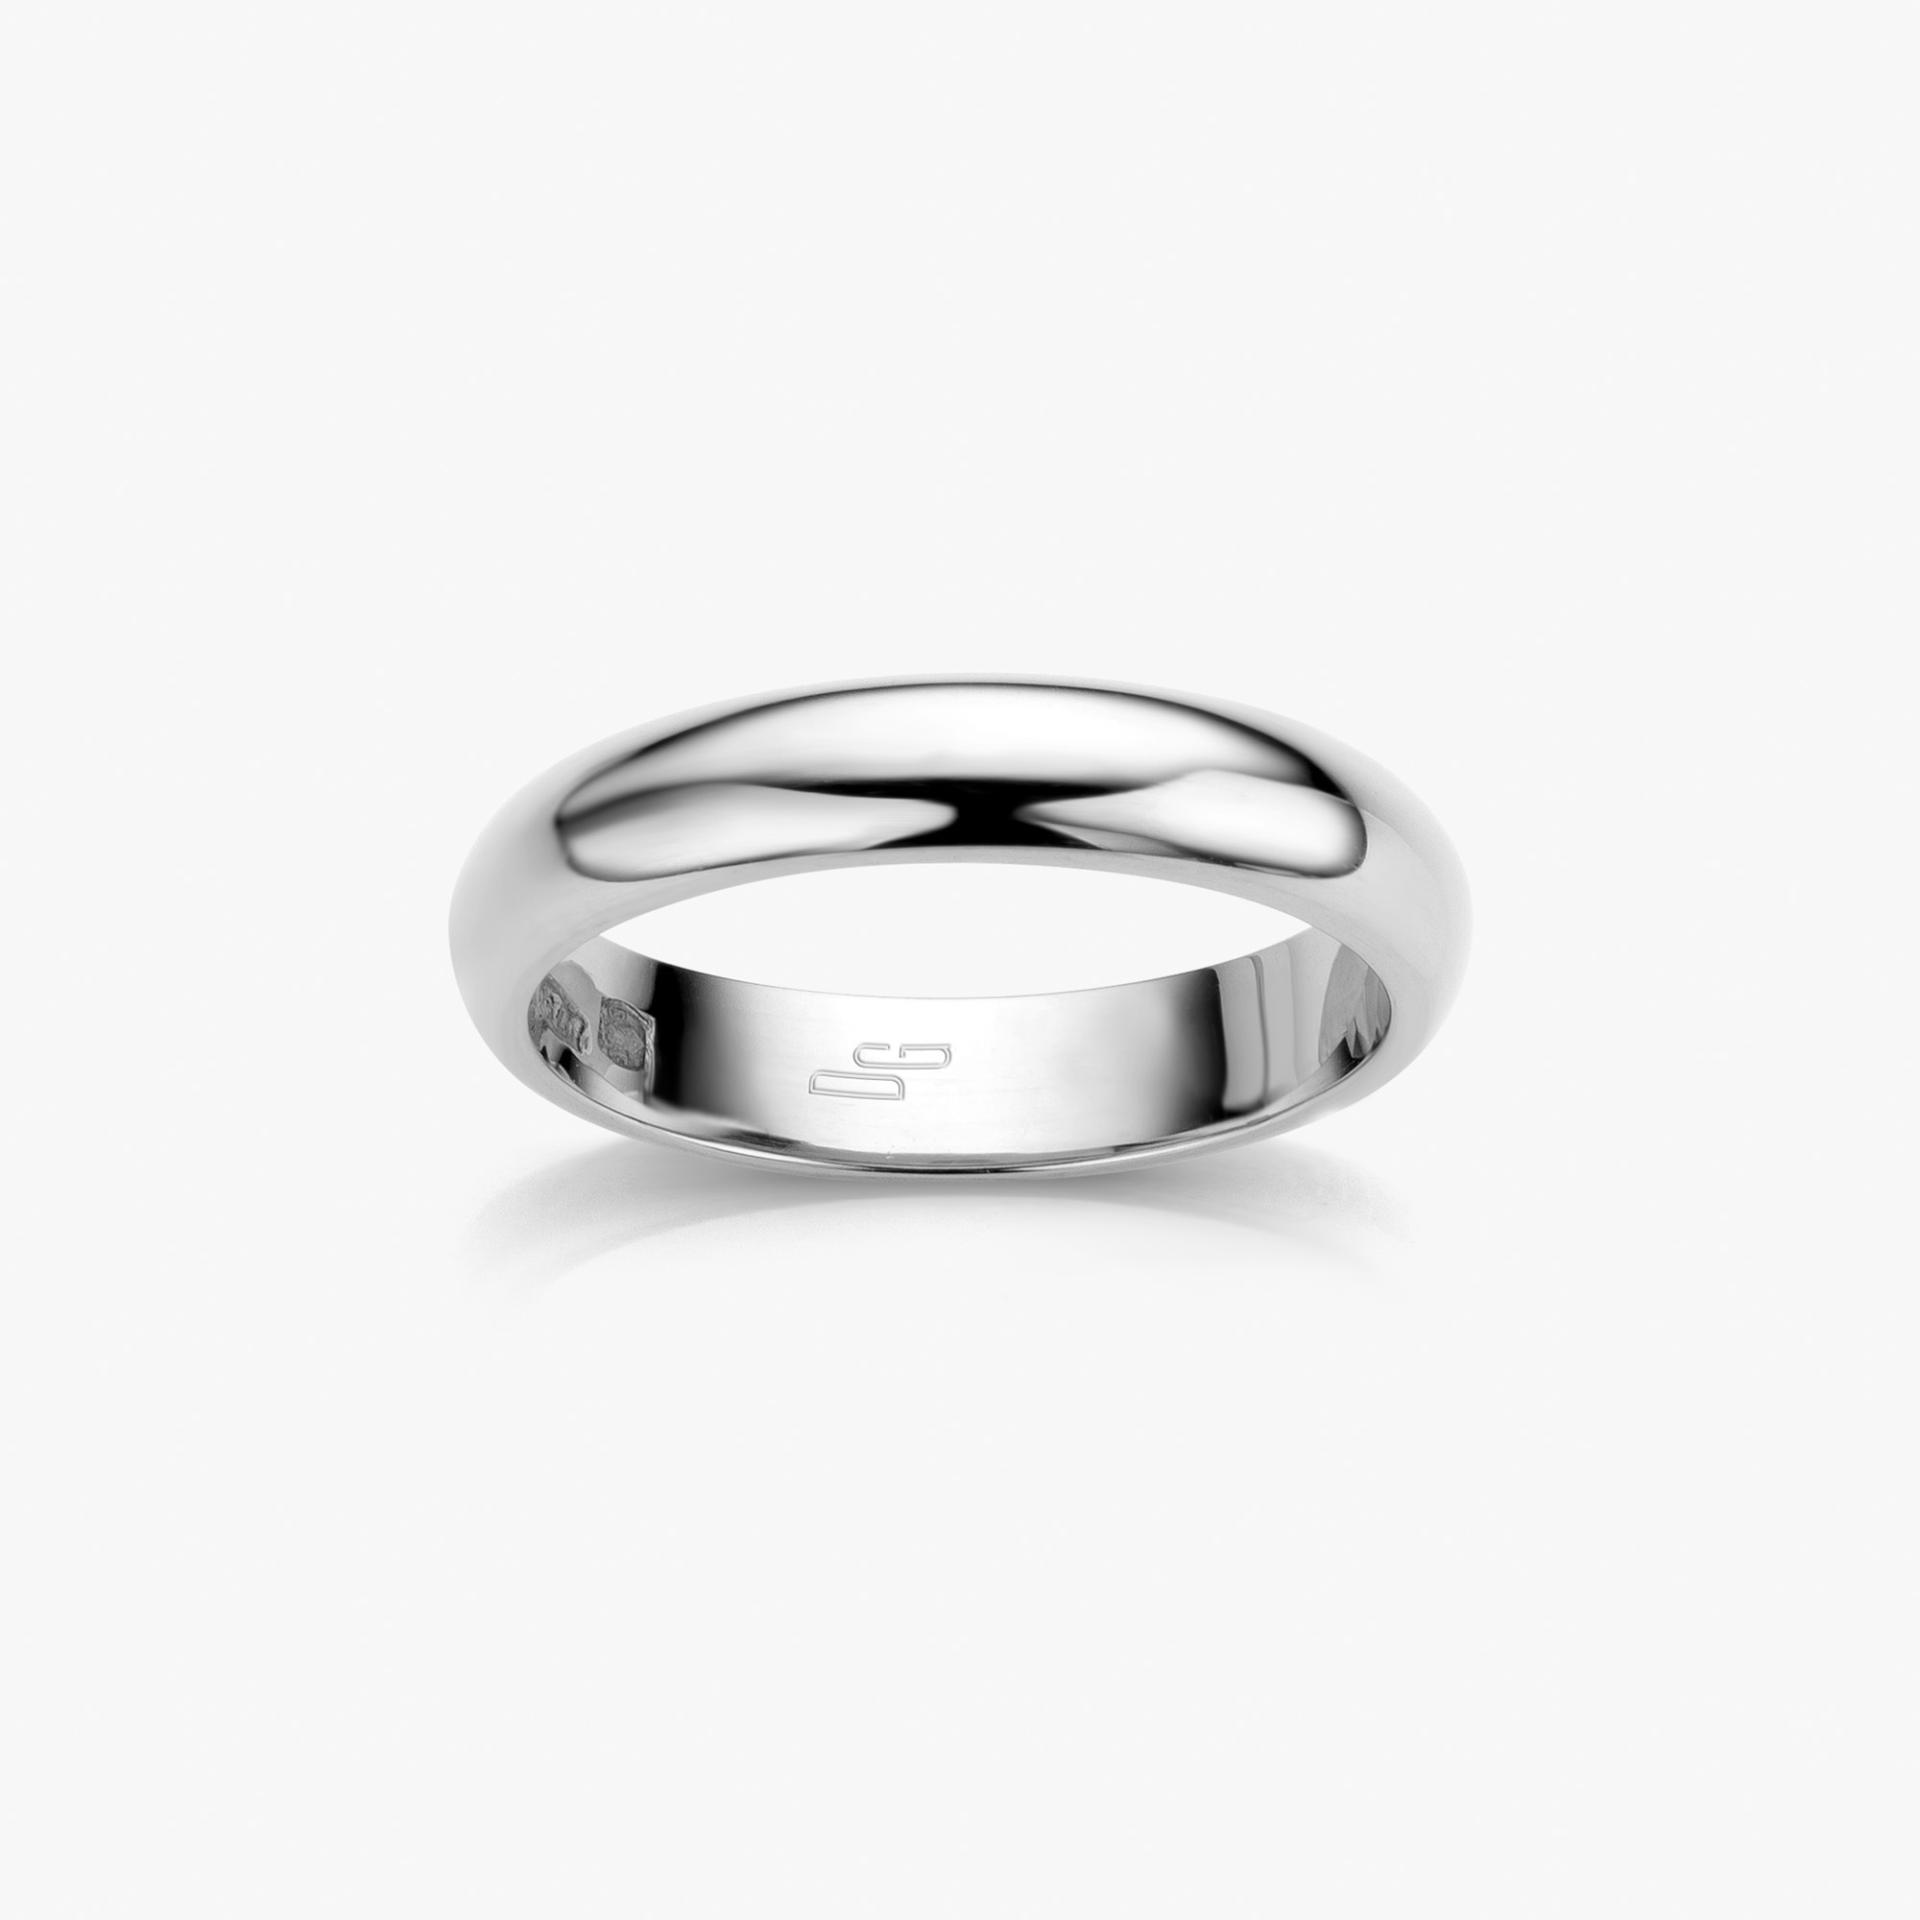 Wedding ring classic model made by Maison De Greef